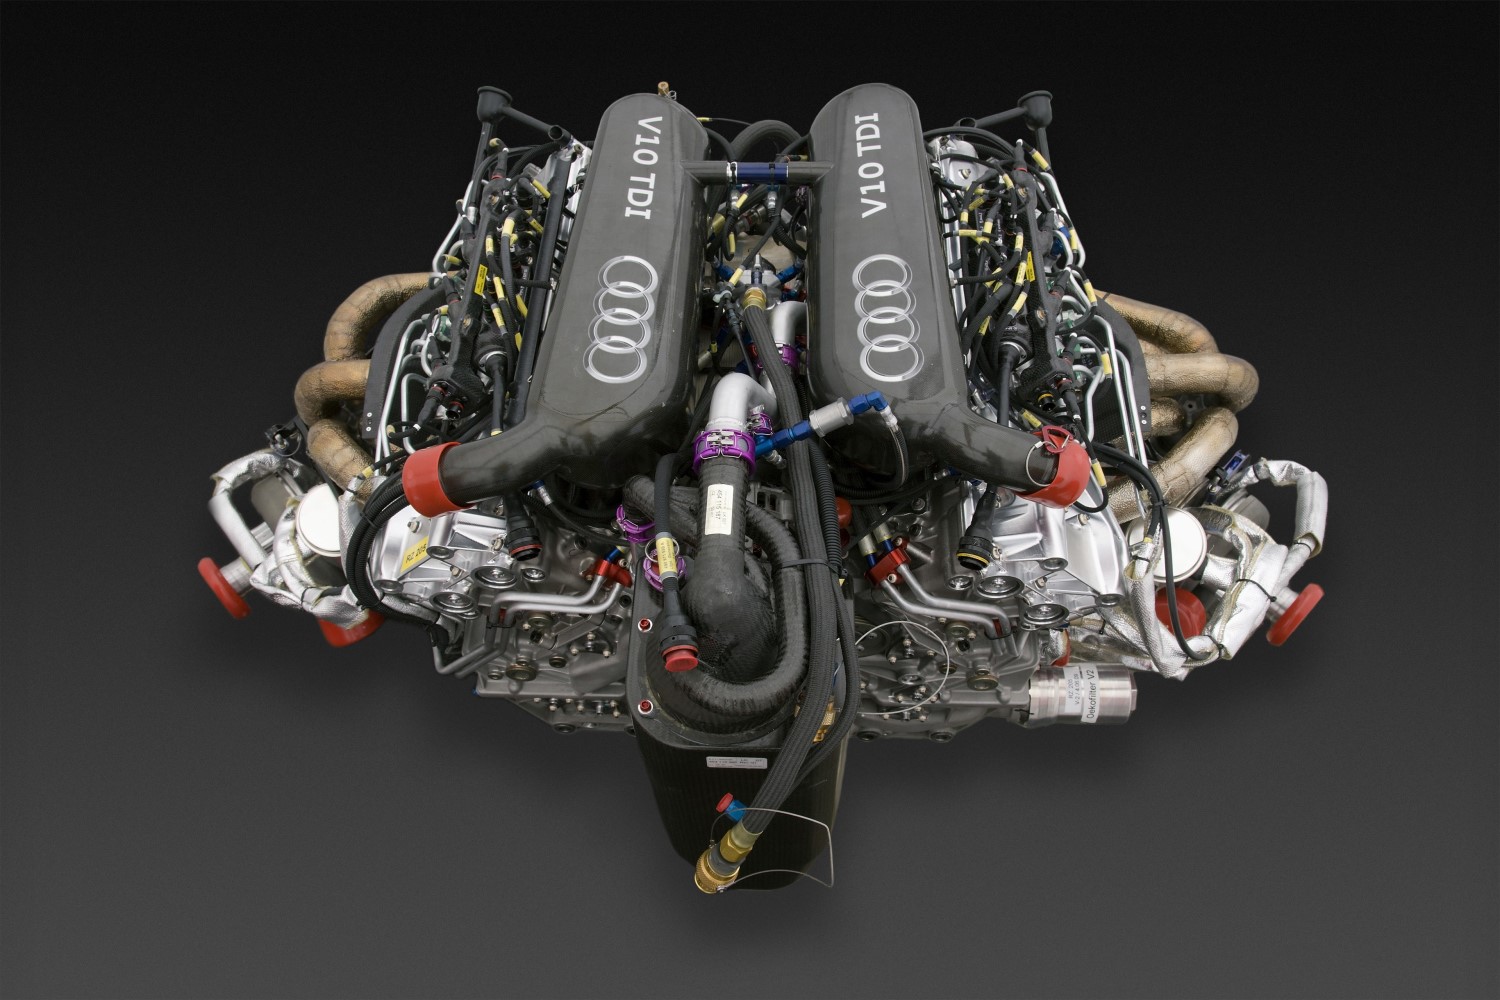 Audi was the first to bring 'dirty diesel' engines to LeMans